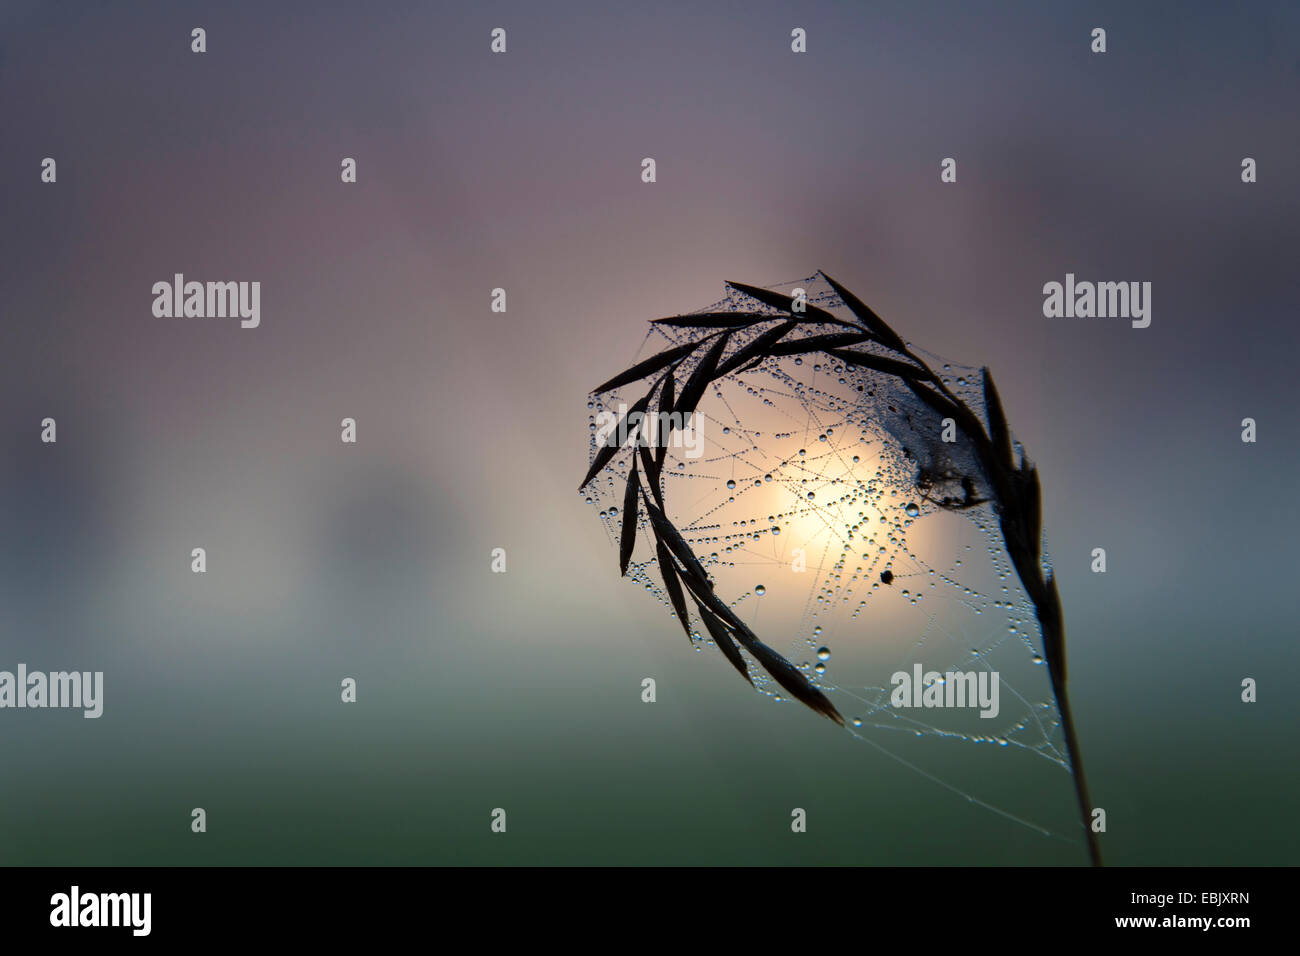 quackgrass (Agropyron repens, Elymus repens), spider web heavy from the morning dew fixes at a blade of grass in front of sunrise and morning fog over a meadow landscape, Germany, Saxony, Vogtlaendische Schweiz Stock Photo